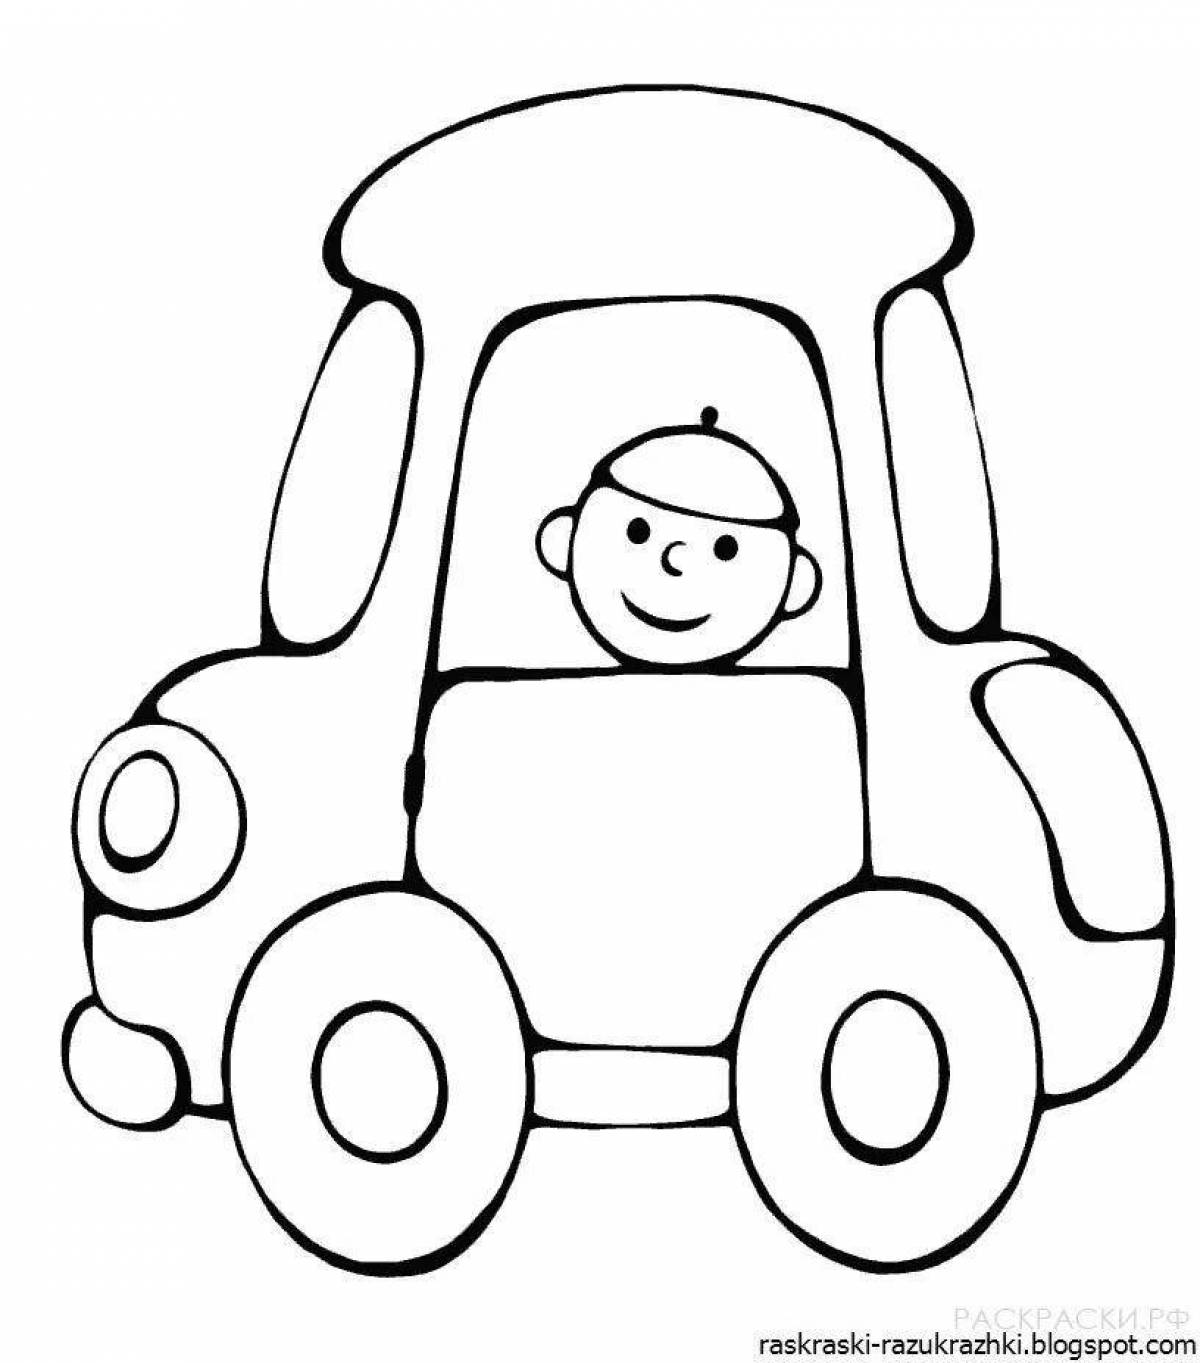 Coloring book shining cars for children 3 years old